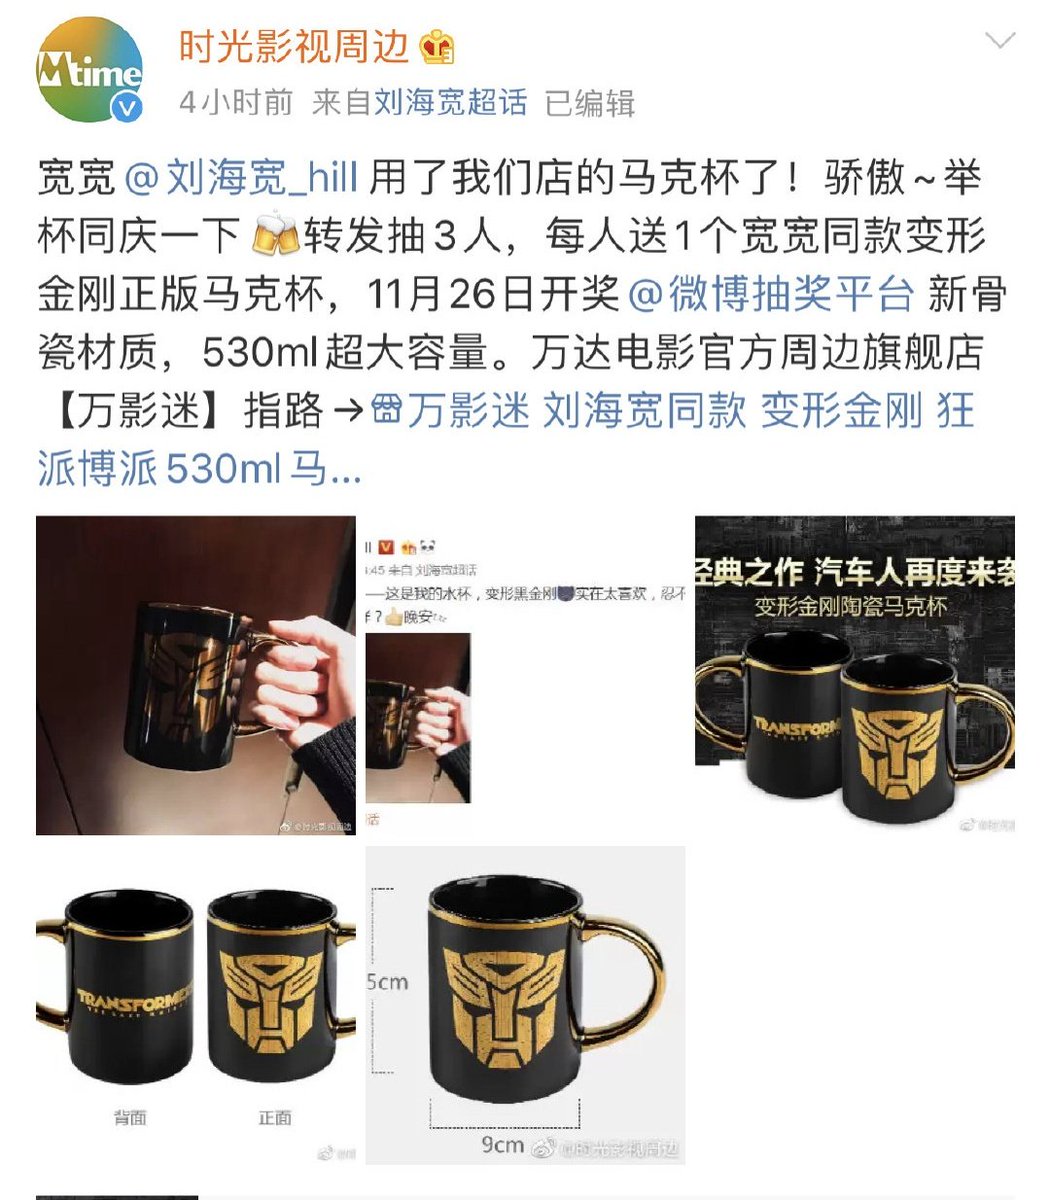 #14• They went to the cinema together?• Did ZZJ get the other half of the couple mug?• Liu HaiKuan updates extremely seldom. But he always chooses to update his weibo whenever ZZJ goes online. Close timestamps online, always. #朱刘海 #ZhuLiuHai  #LiuHaiKuan  #จูหลิวไห่